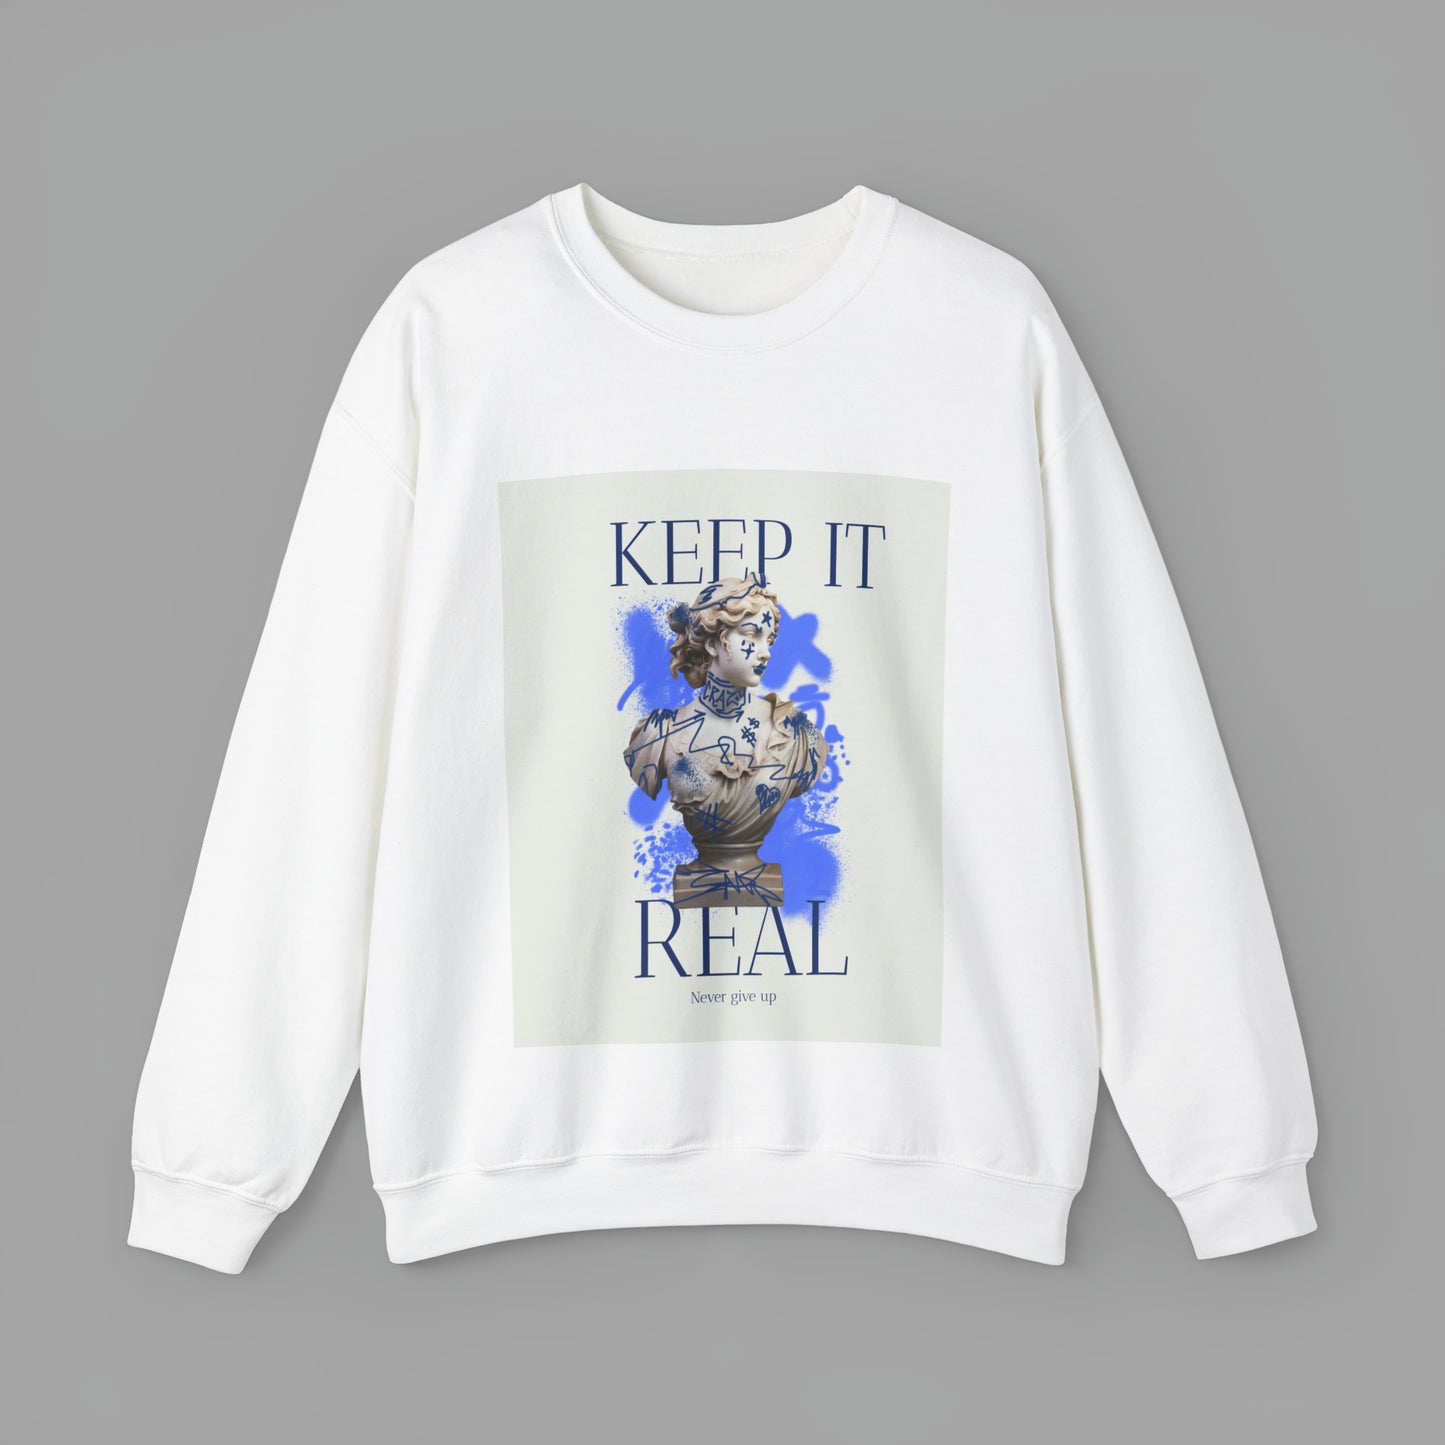 KEEP IT REAL Pullover